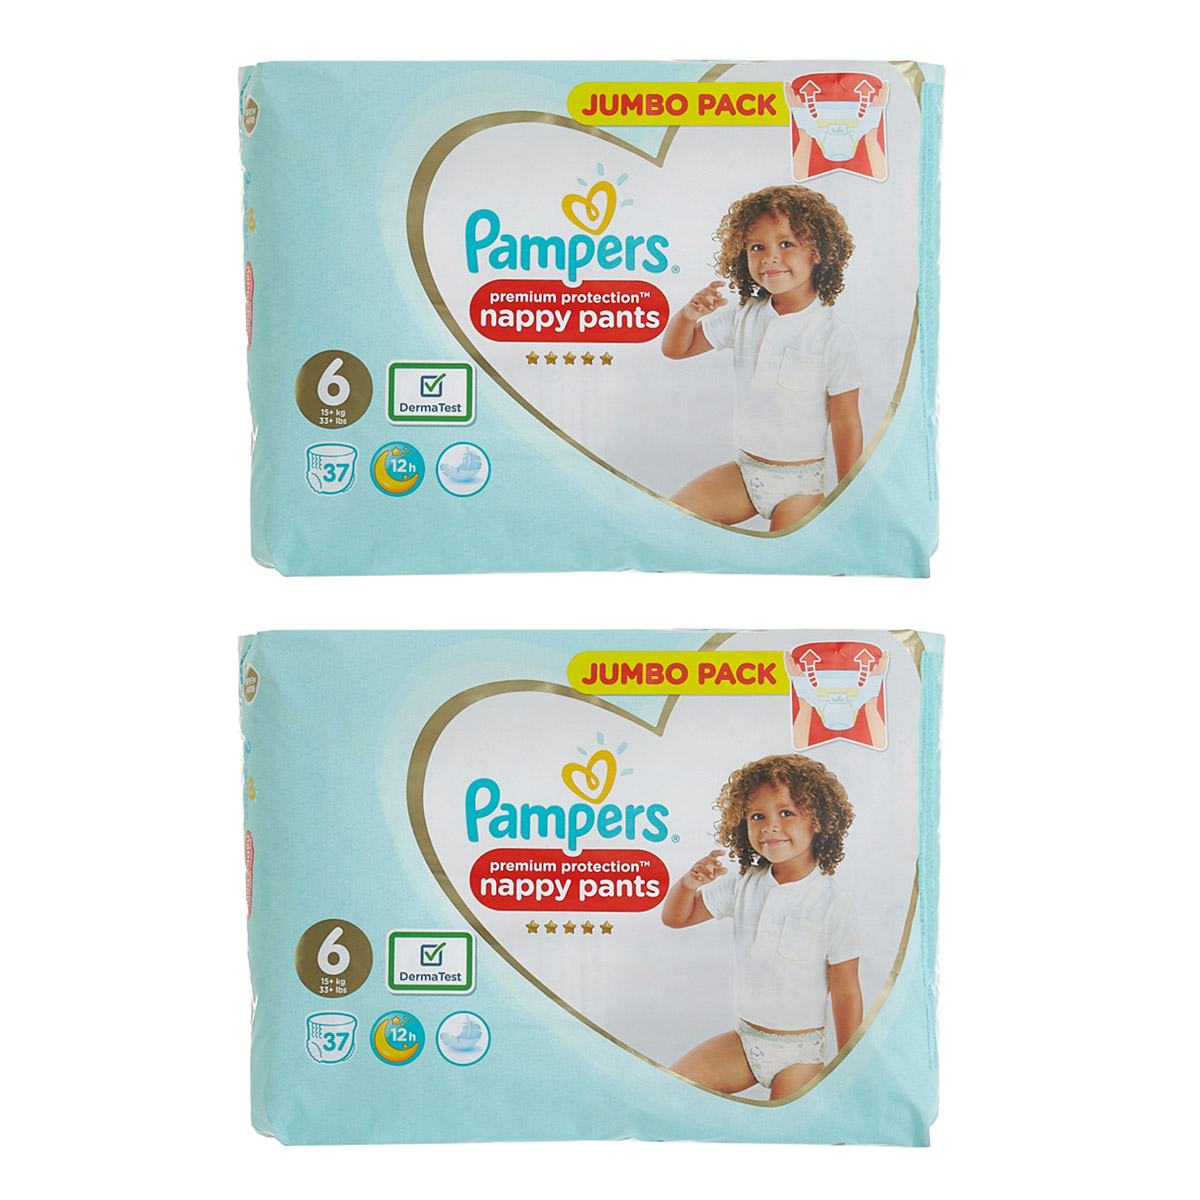 Pampers Premium Protection Nappy Pants, Size 6 (15kg+) Essential Pack